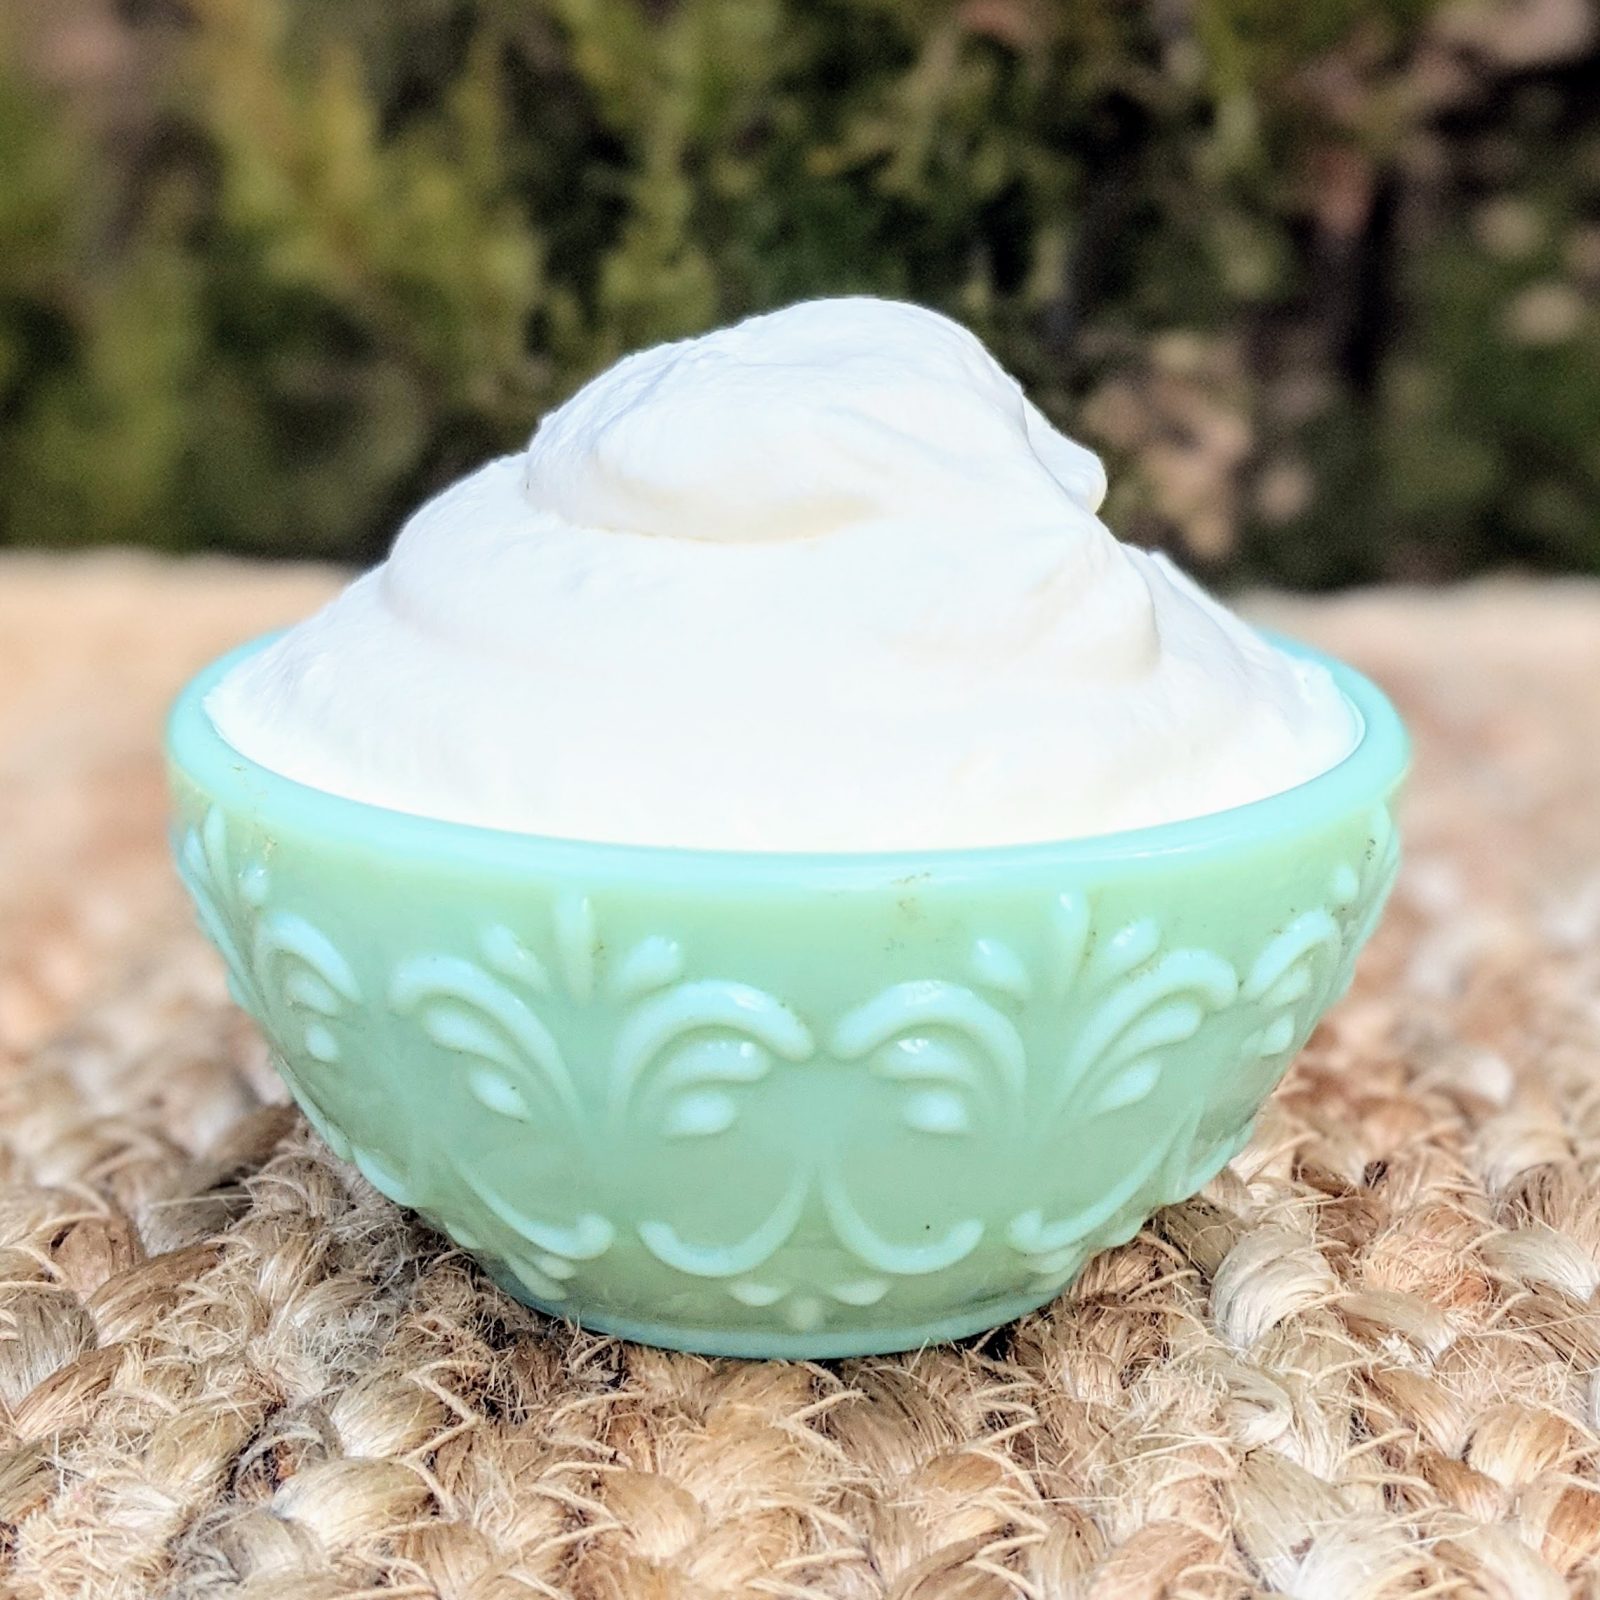 whipped cream in green bowl